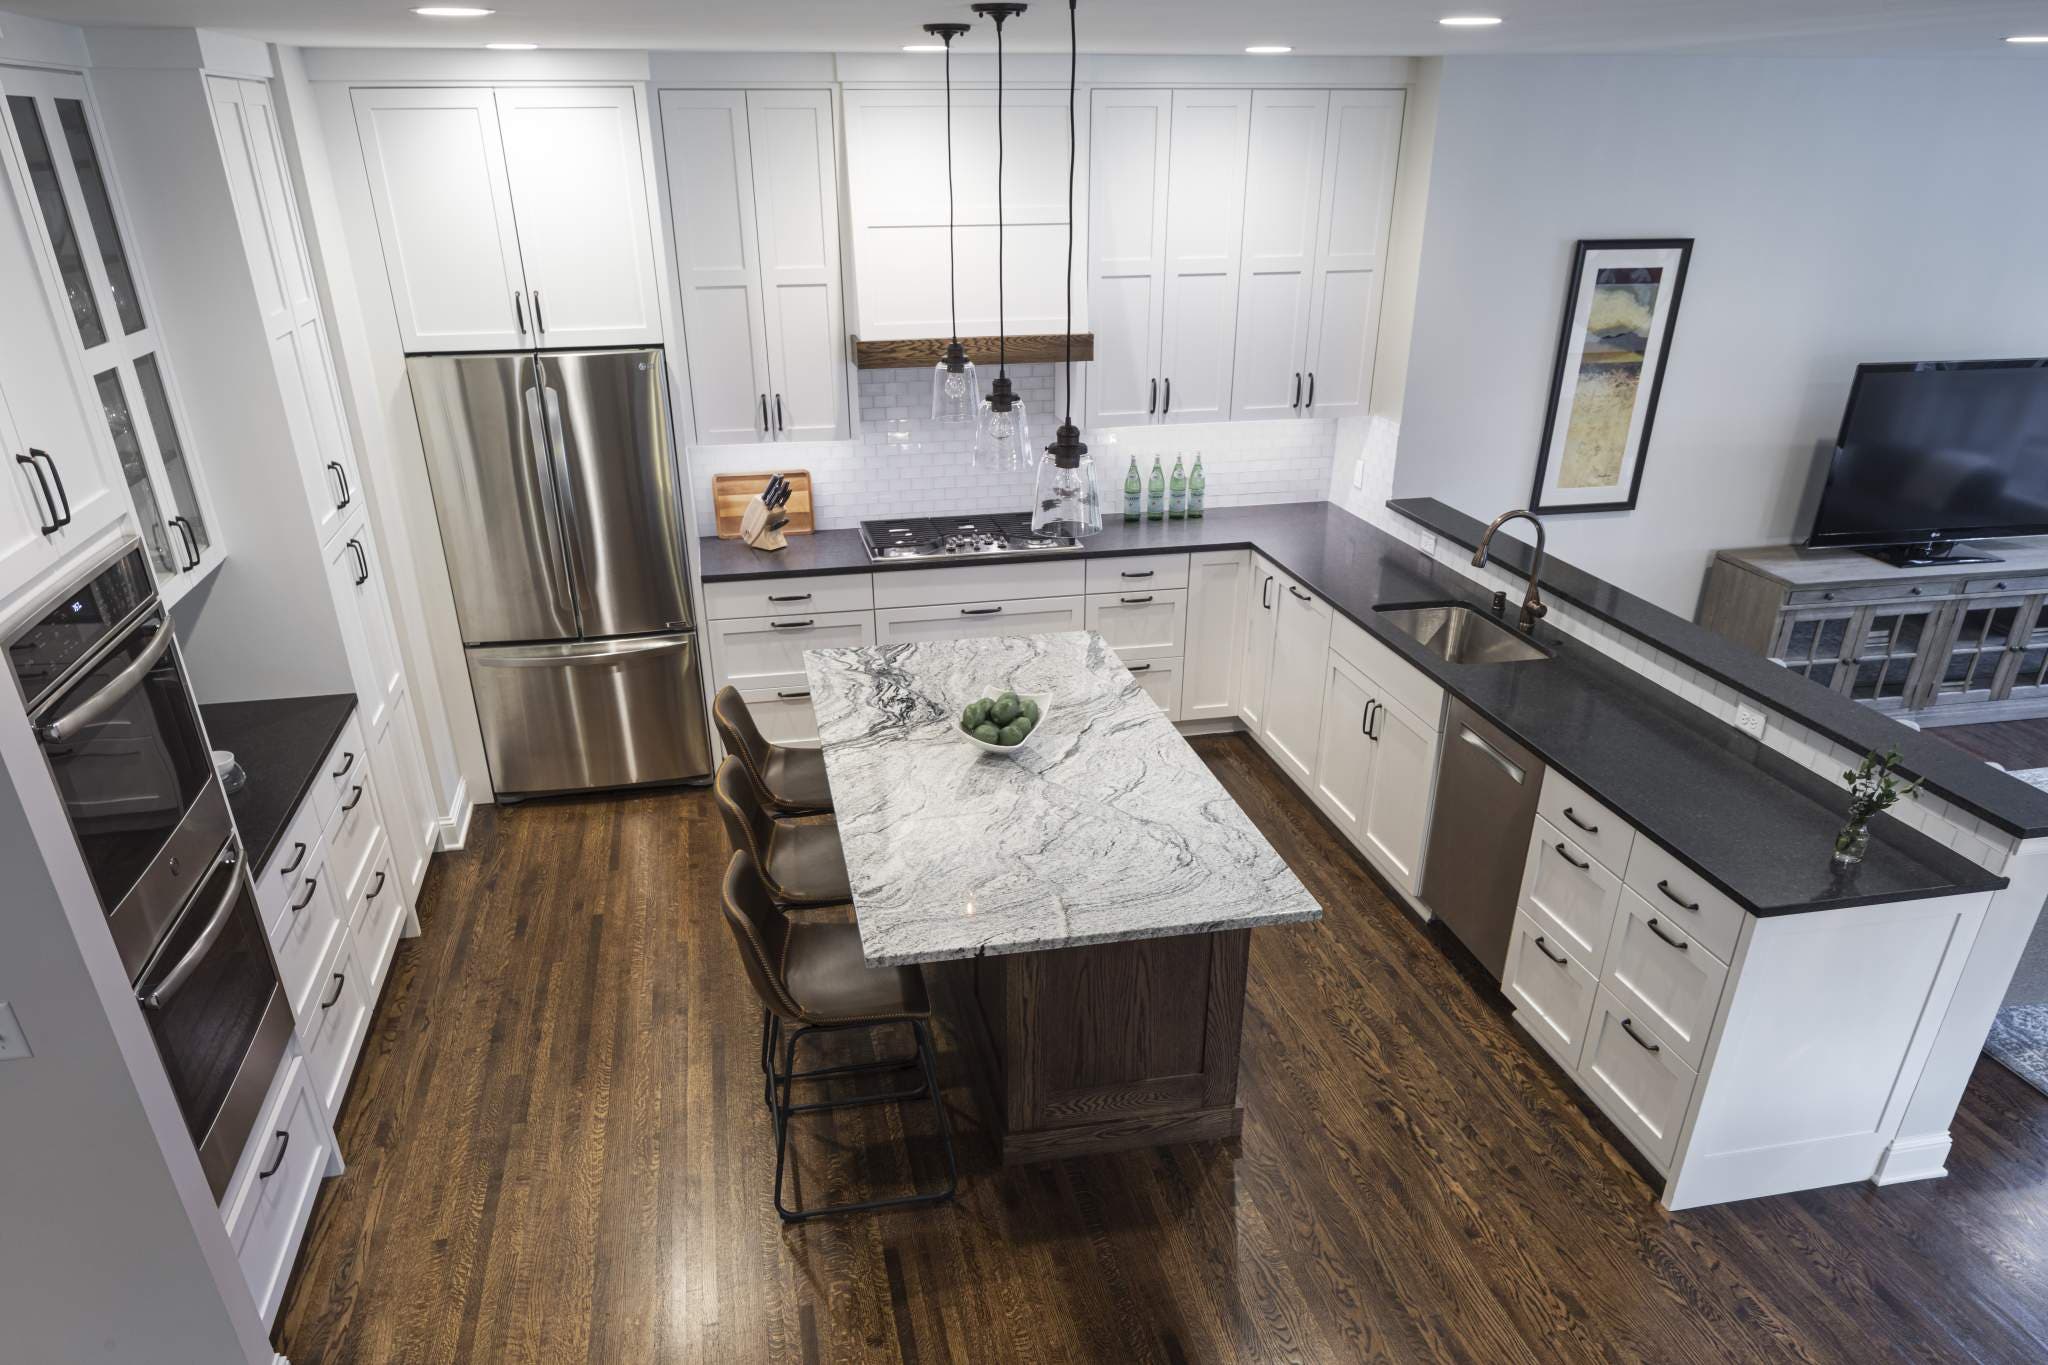 A Guide to Pro Kitchen Remodeling in Minneapolis, MN